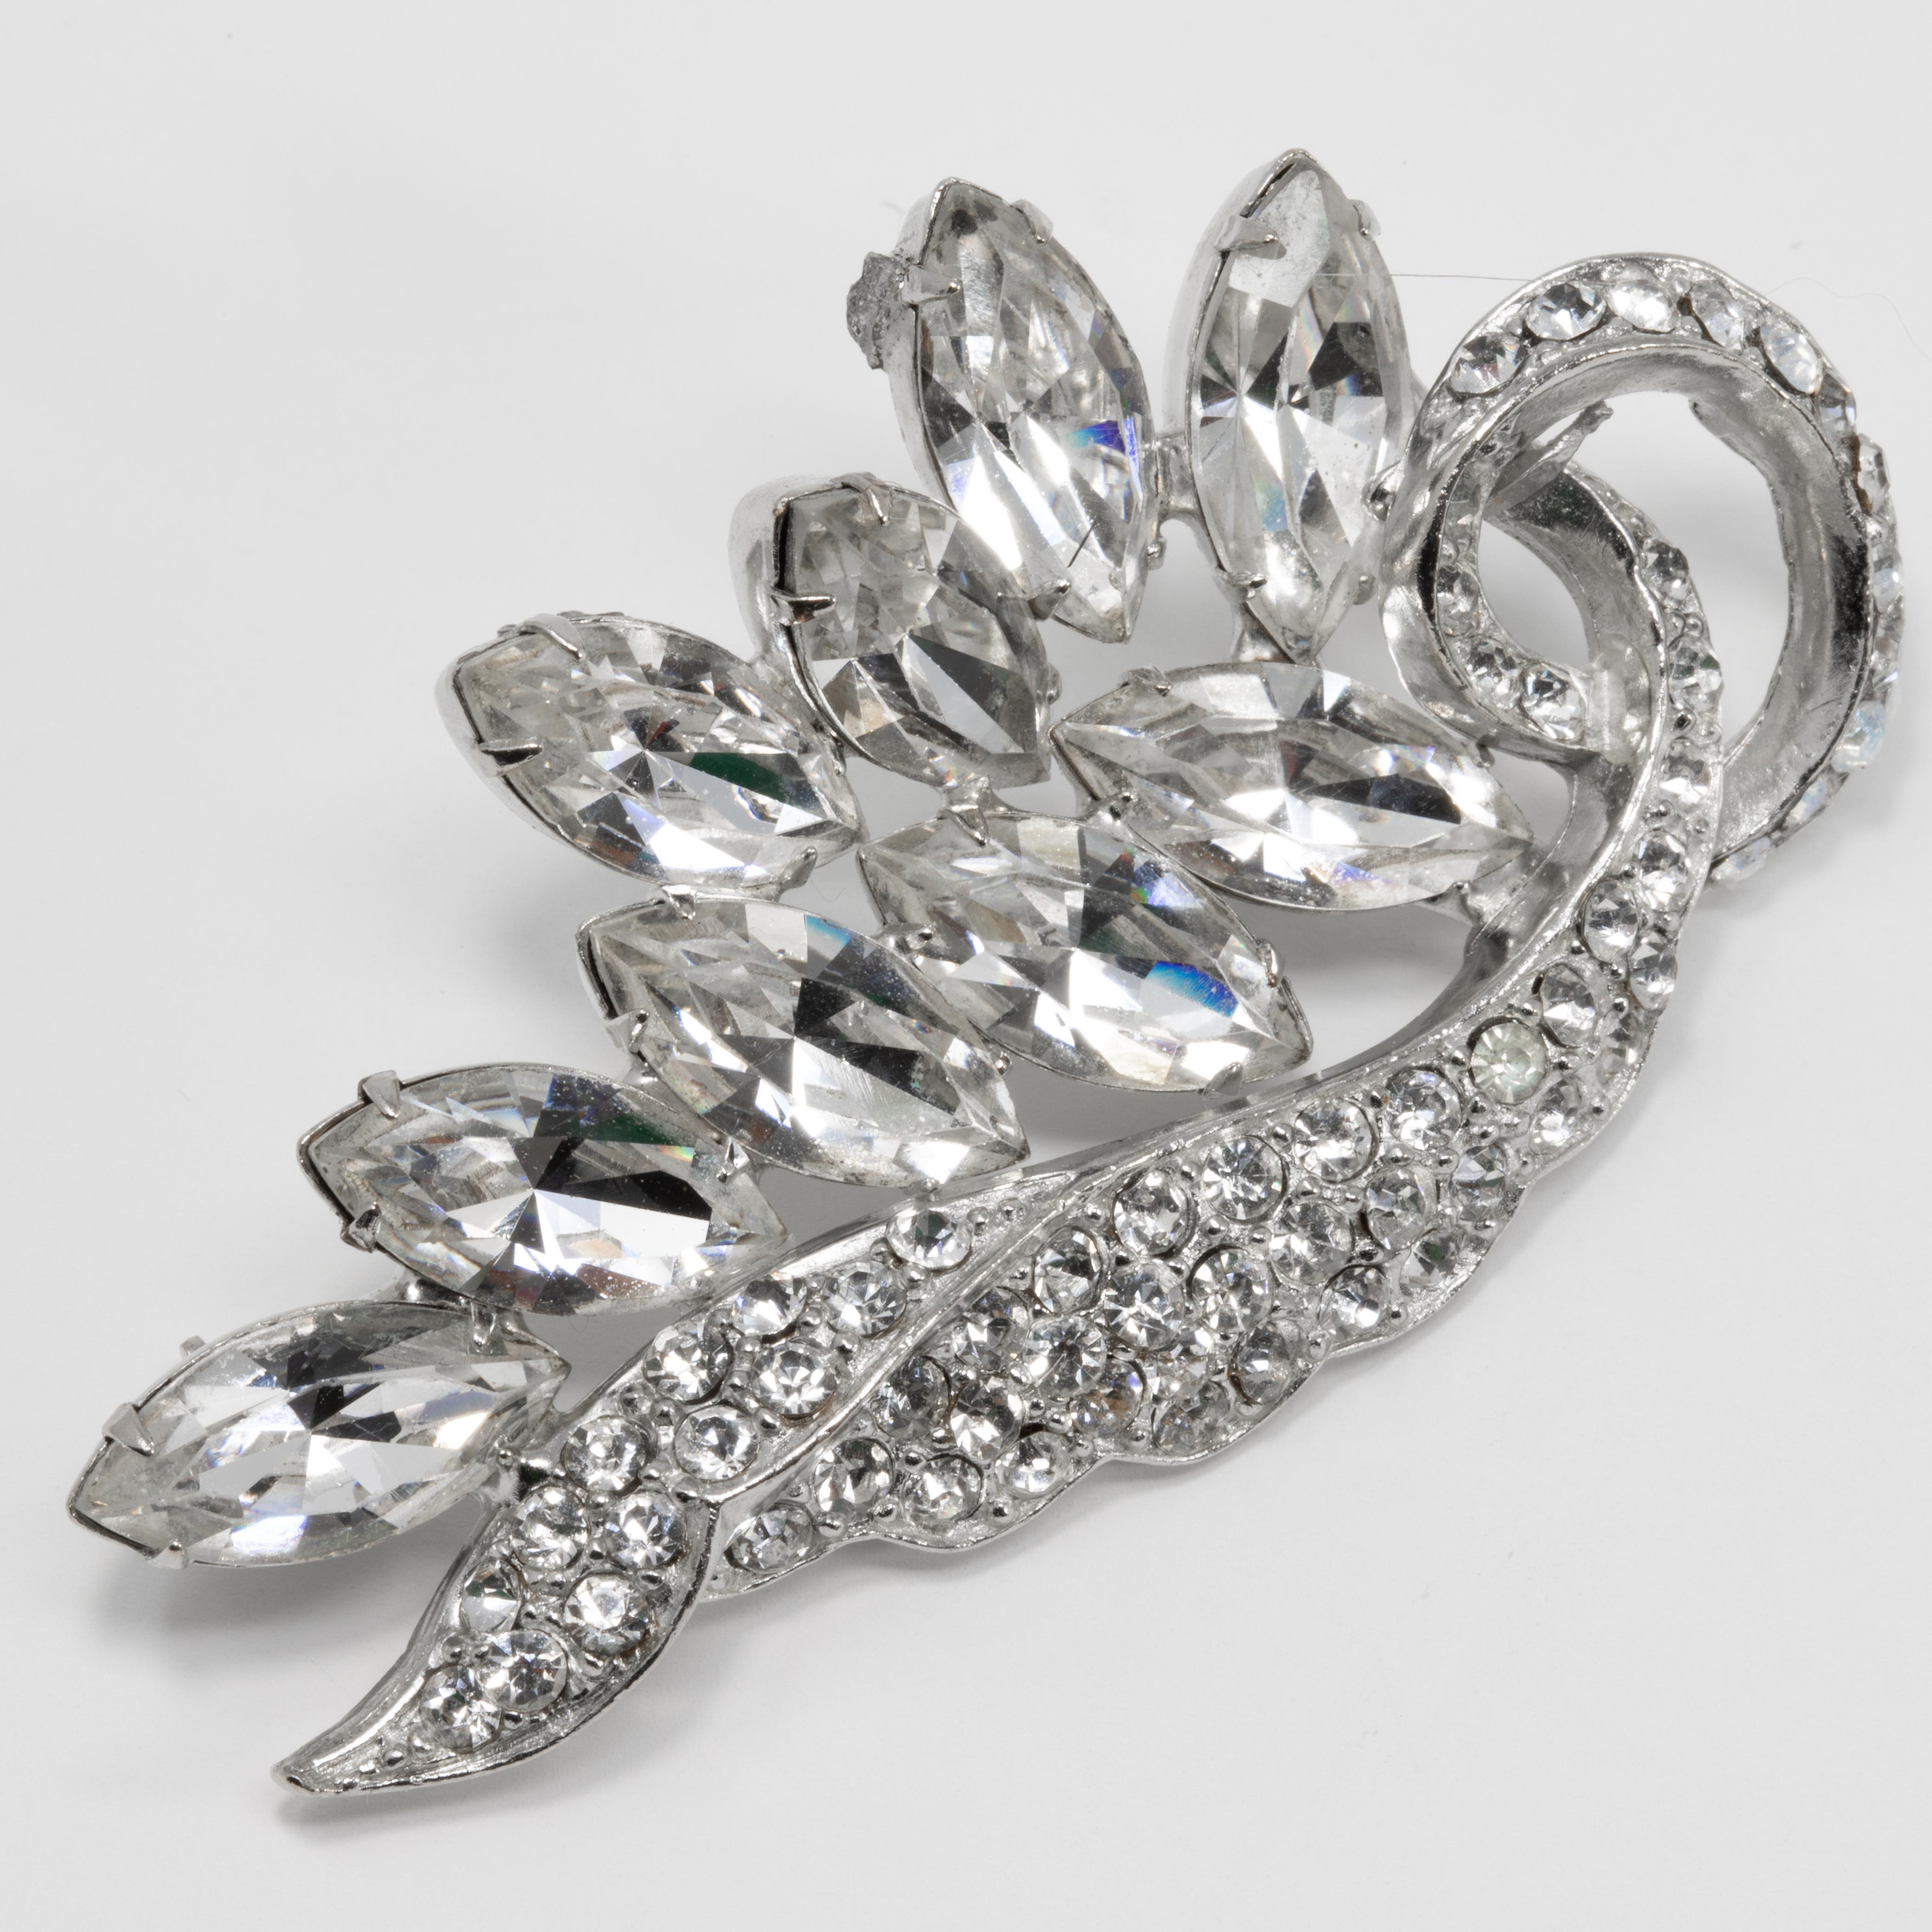 A sparkling floral-themed pin with clear faceted crystals prong set in a rhodium-plated setting. Perfect as both a casual and formal retro accessory!

